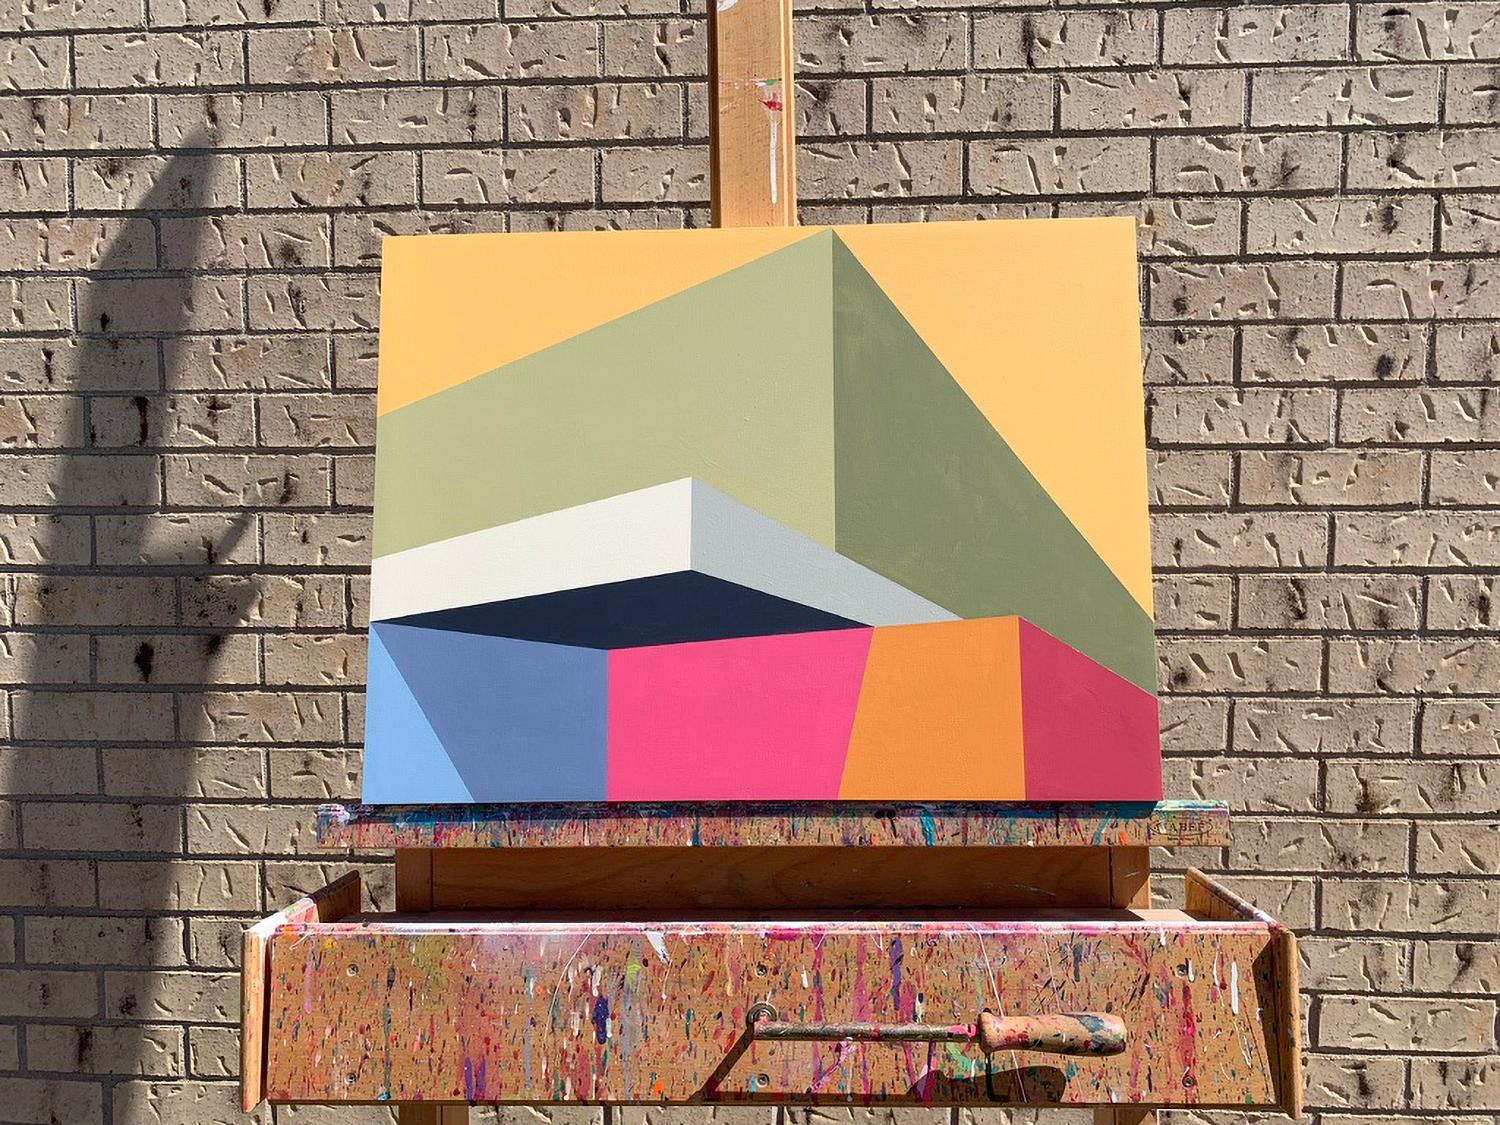 <p>Artist Comments<br>Artist Craig Rouse depicts a simplified abstract environment expressed with a limited color palette. Part of his NAR series, meaning No Assembly Required. He loosely bases it on a collection of stacked paper cubes arranged and